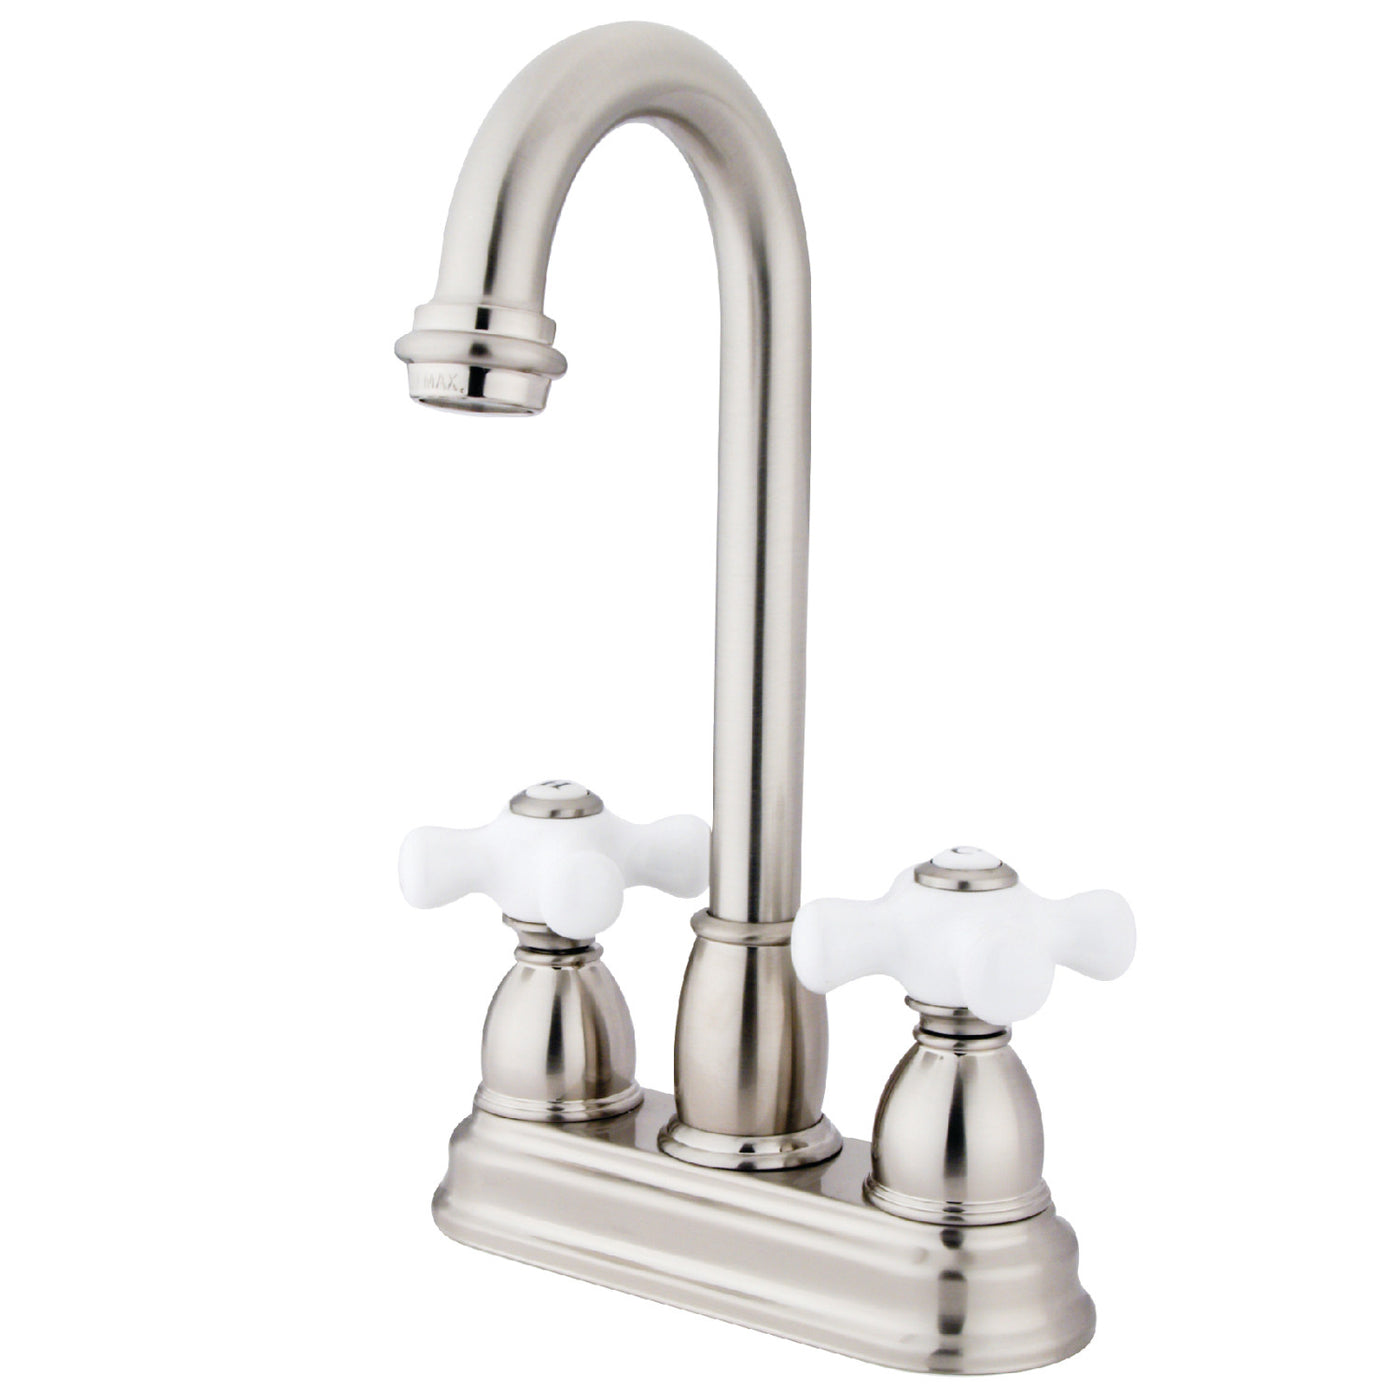 Elements of Design EB3498PX 4-Inch Centerset Bar Faucet, Brushed Nickel